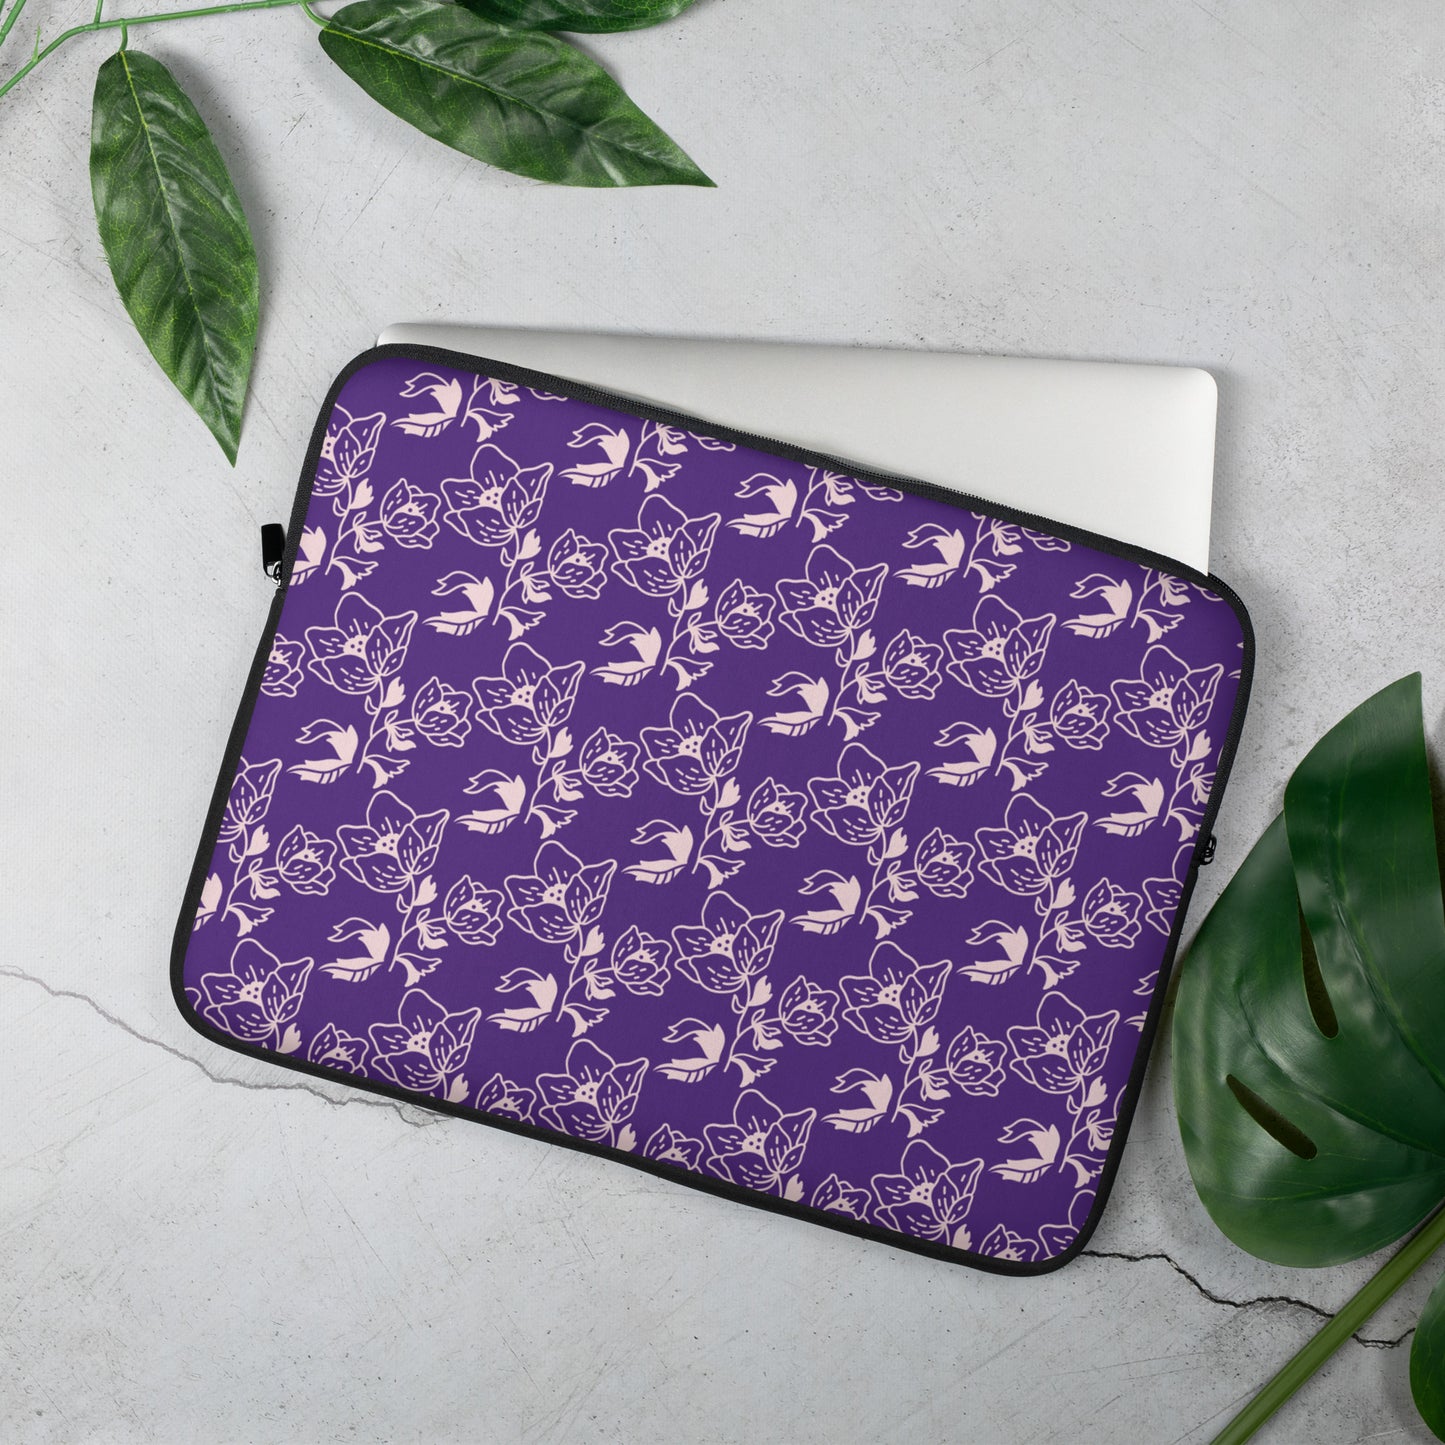 High Quality Laptop Sleeve, 13" and 15" sleeves